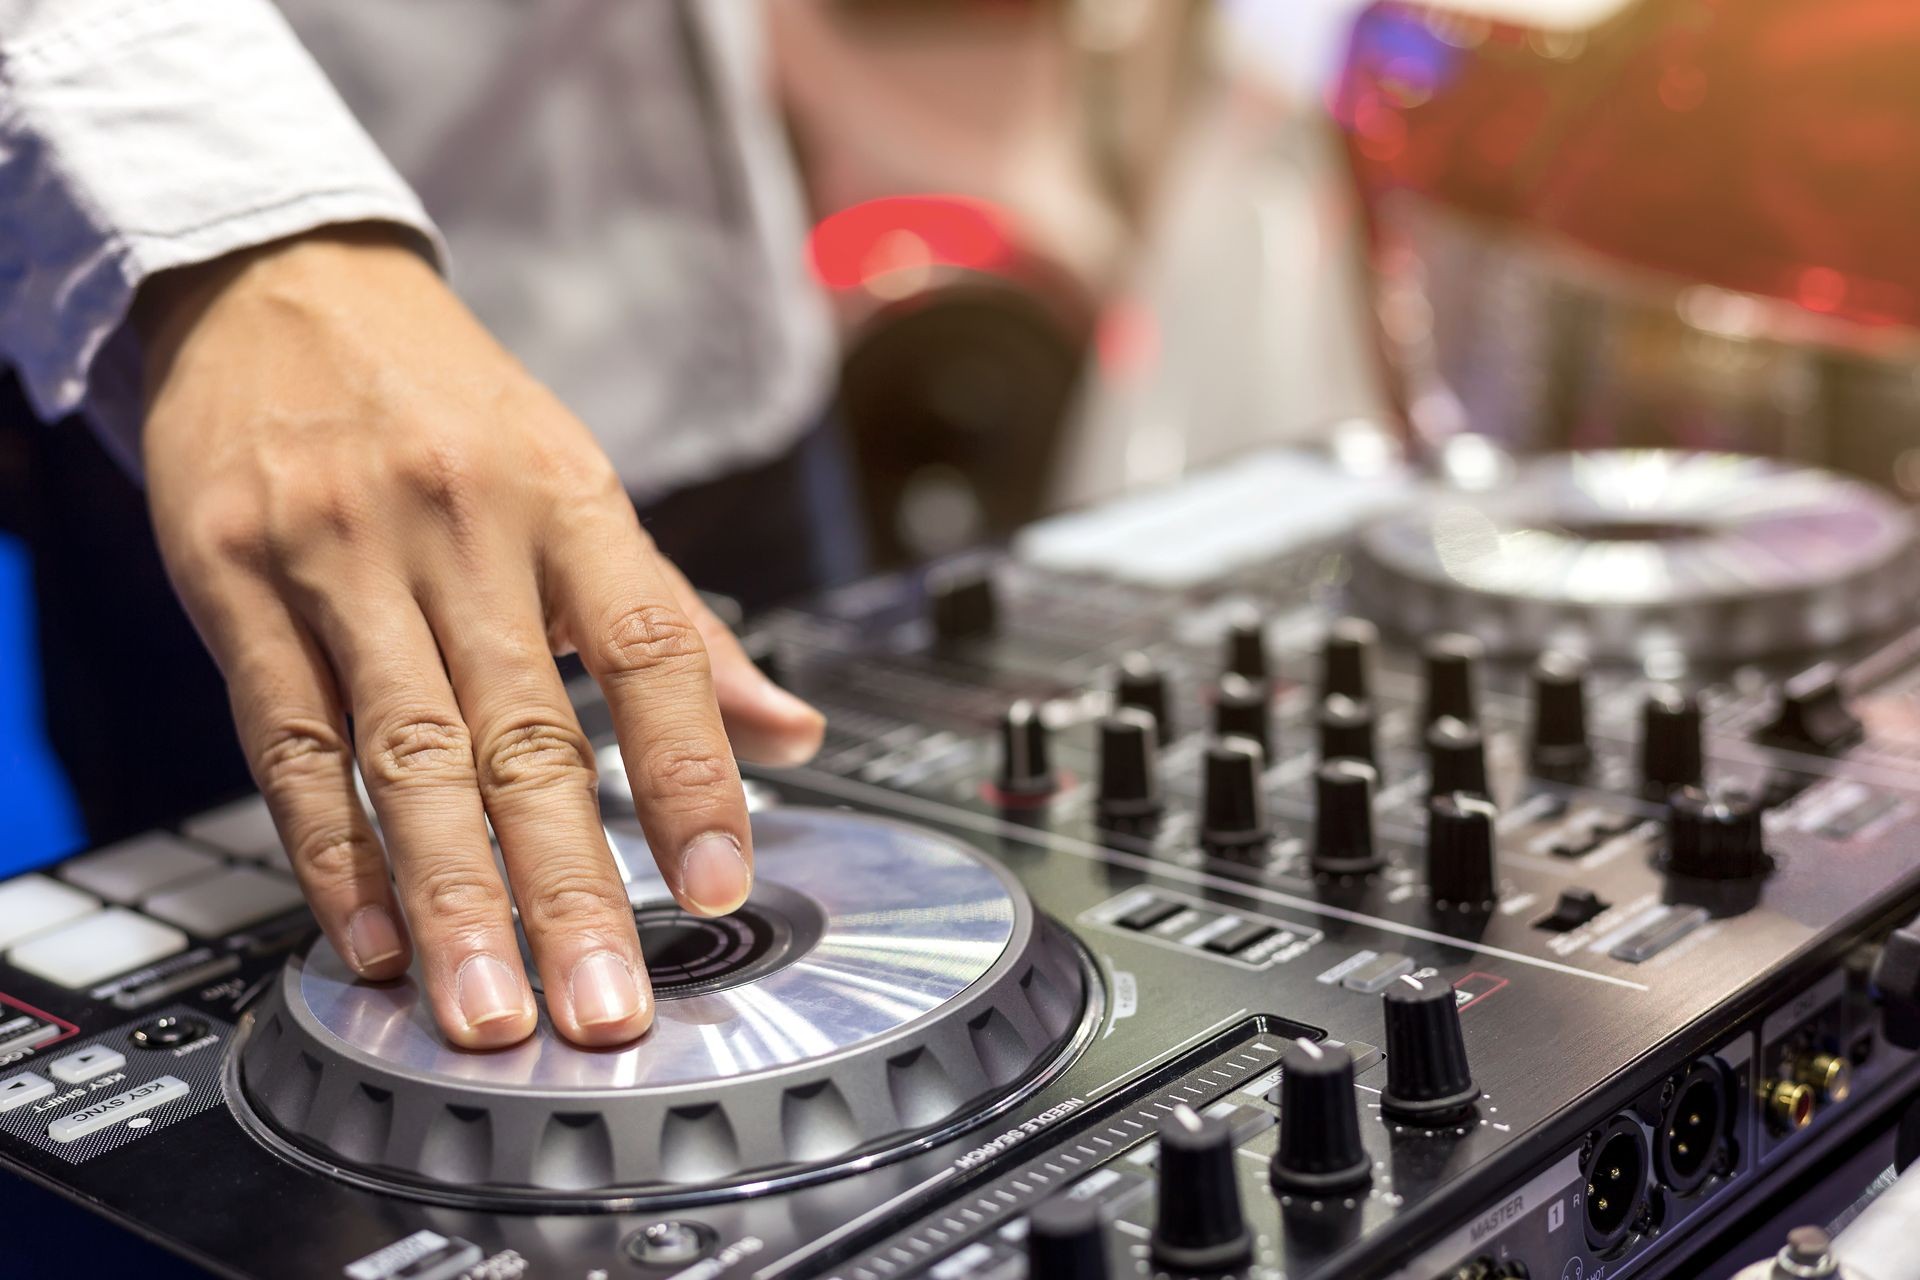 Close up view of  DJ's hand controls on the deck at night. DJ spinning and scratching music in concert using mixing console on a turntable in sound recording studio.